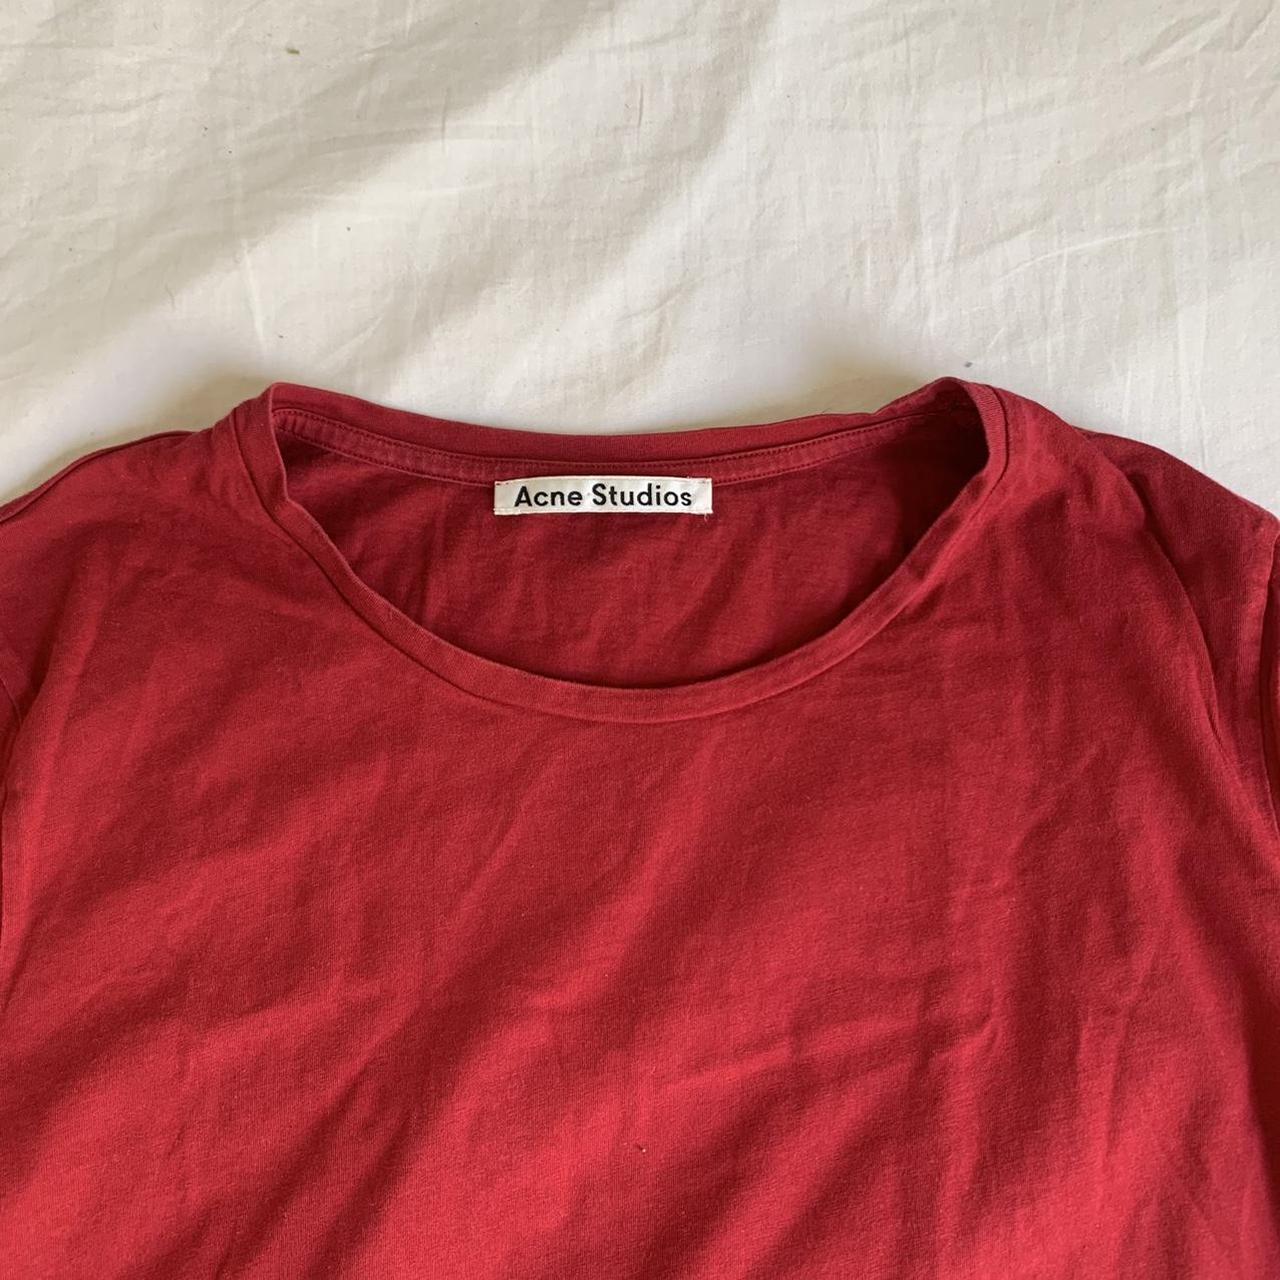 Amazing Acne Studios red t-shirt in size small, but... - Depop